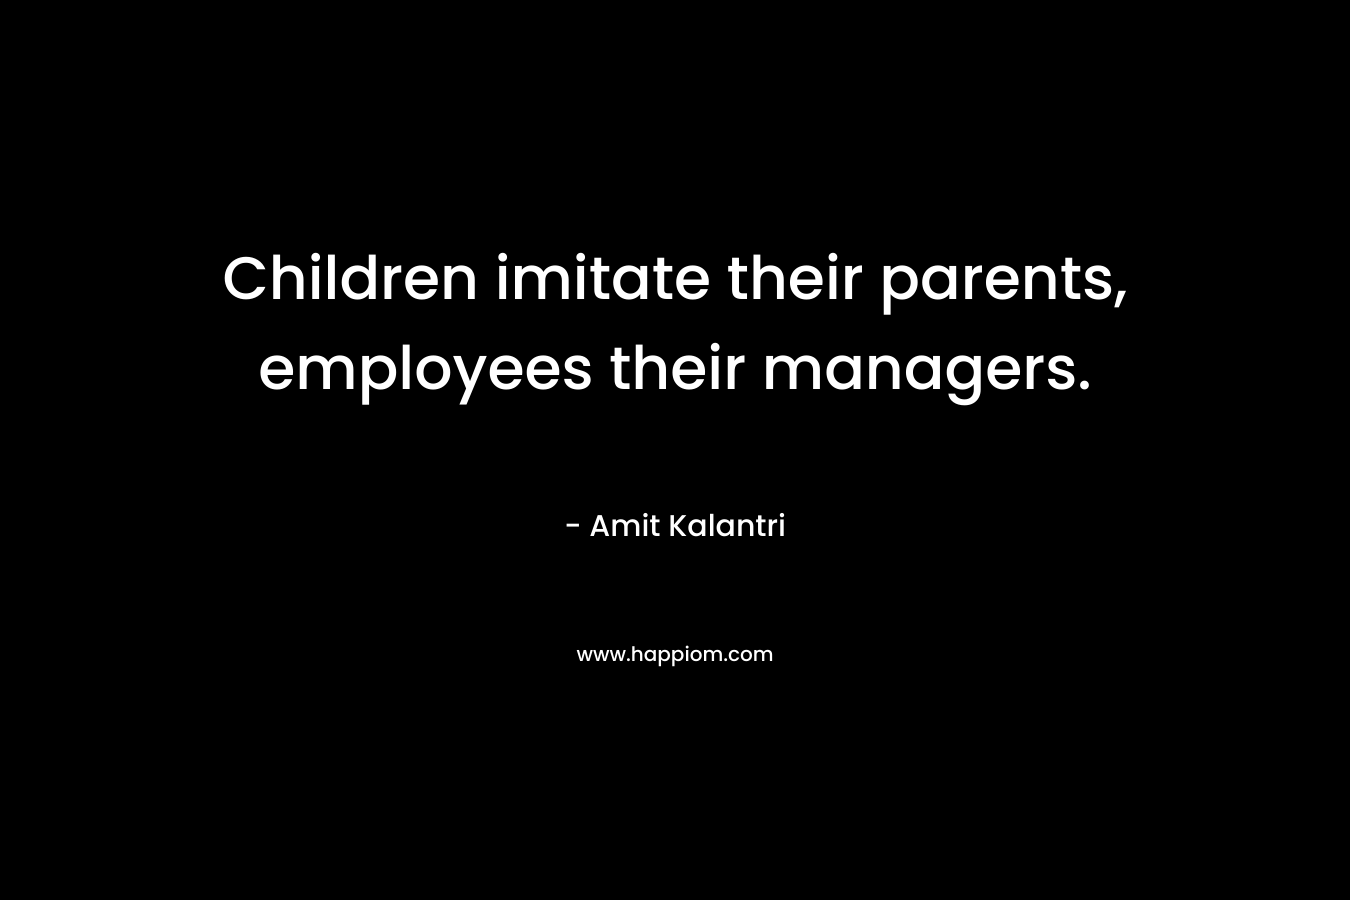 Children imitate their parents, employees their managers.